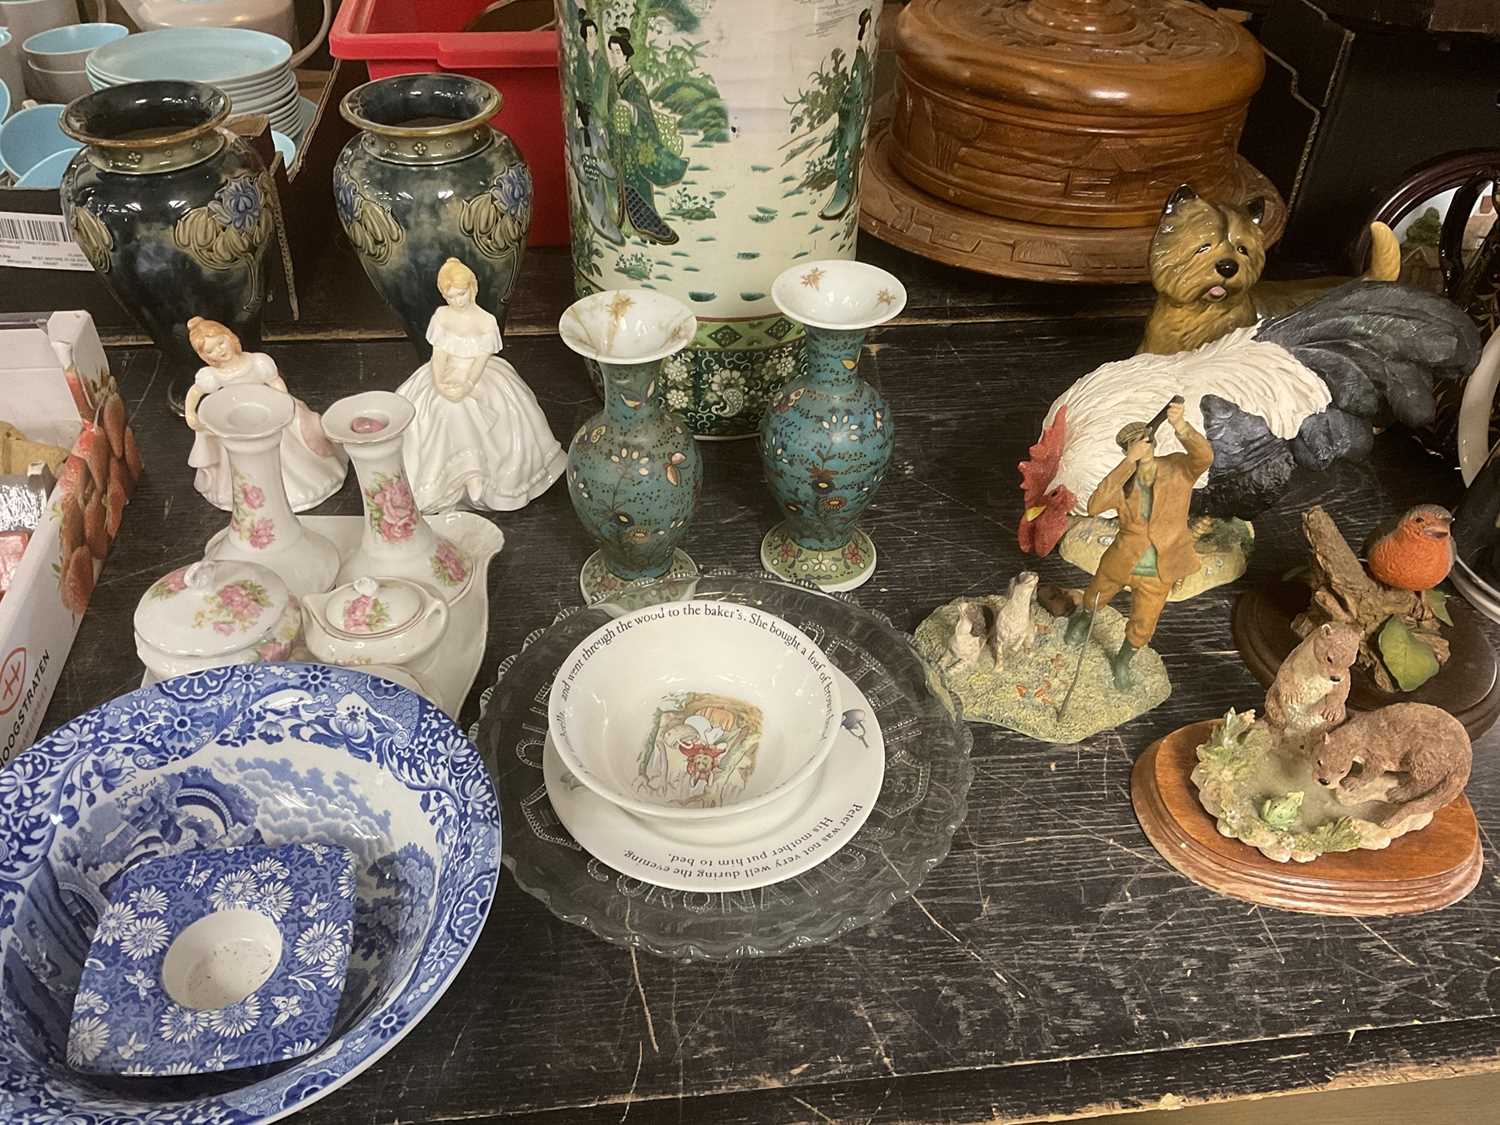 Lot 179 - Decorative china including pair of Doulton vases, Royal Doulton figurines and other items